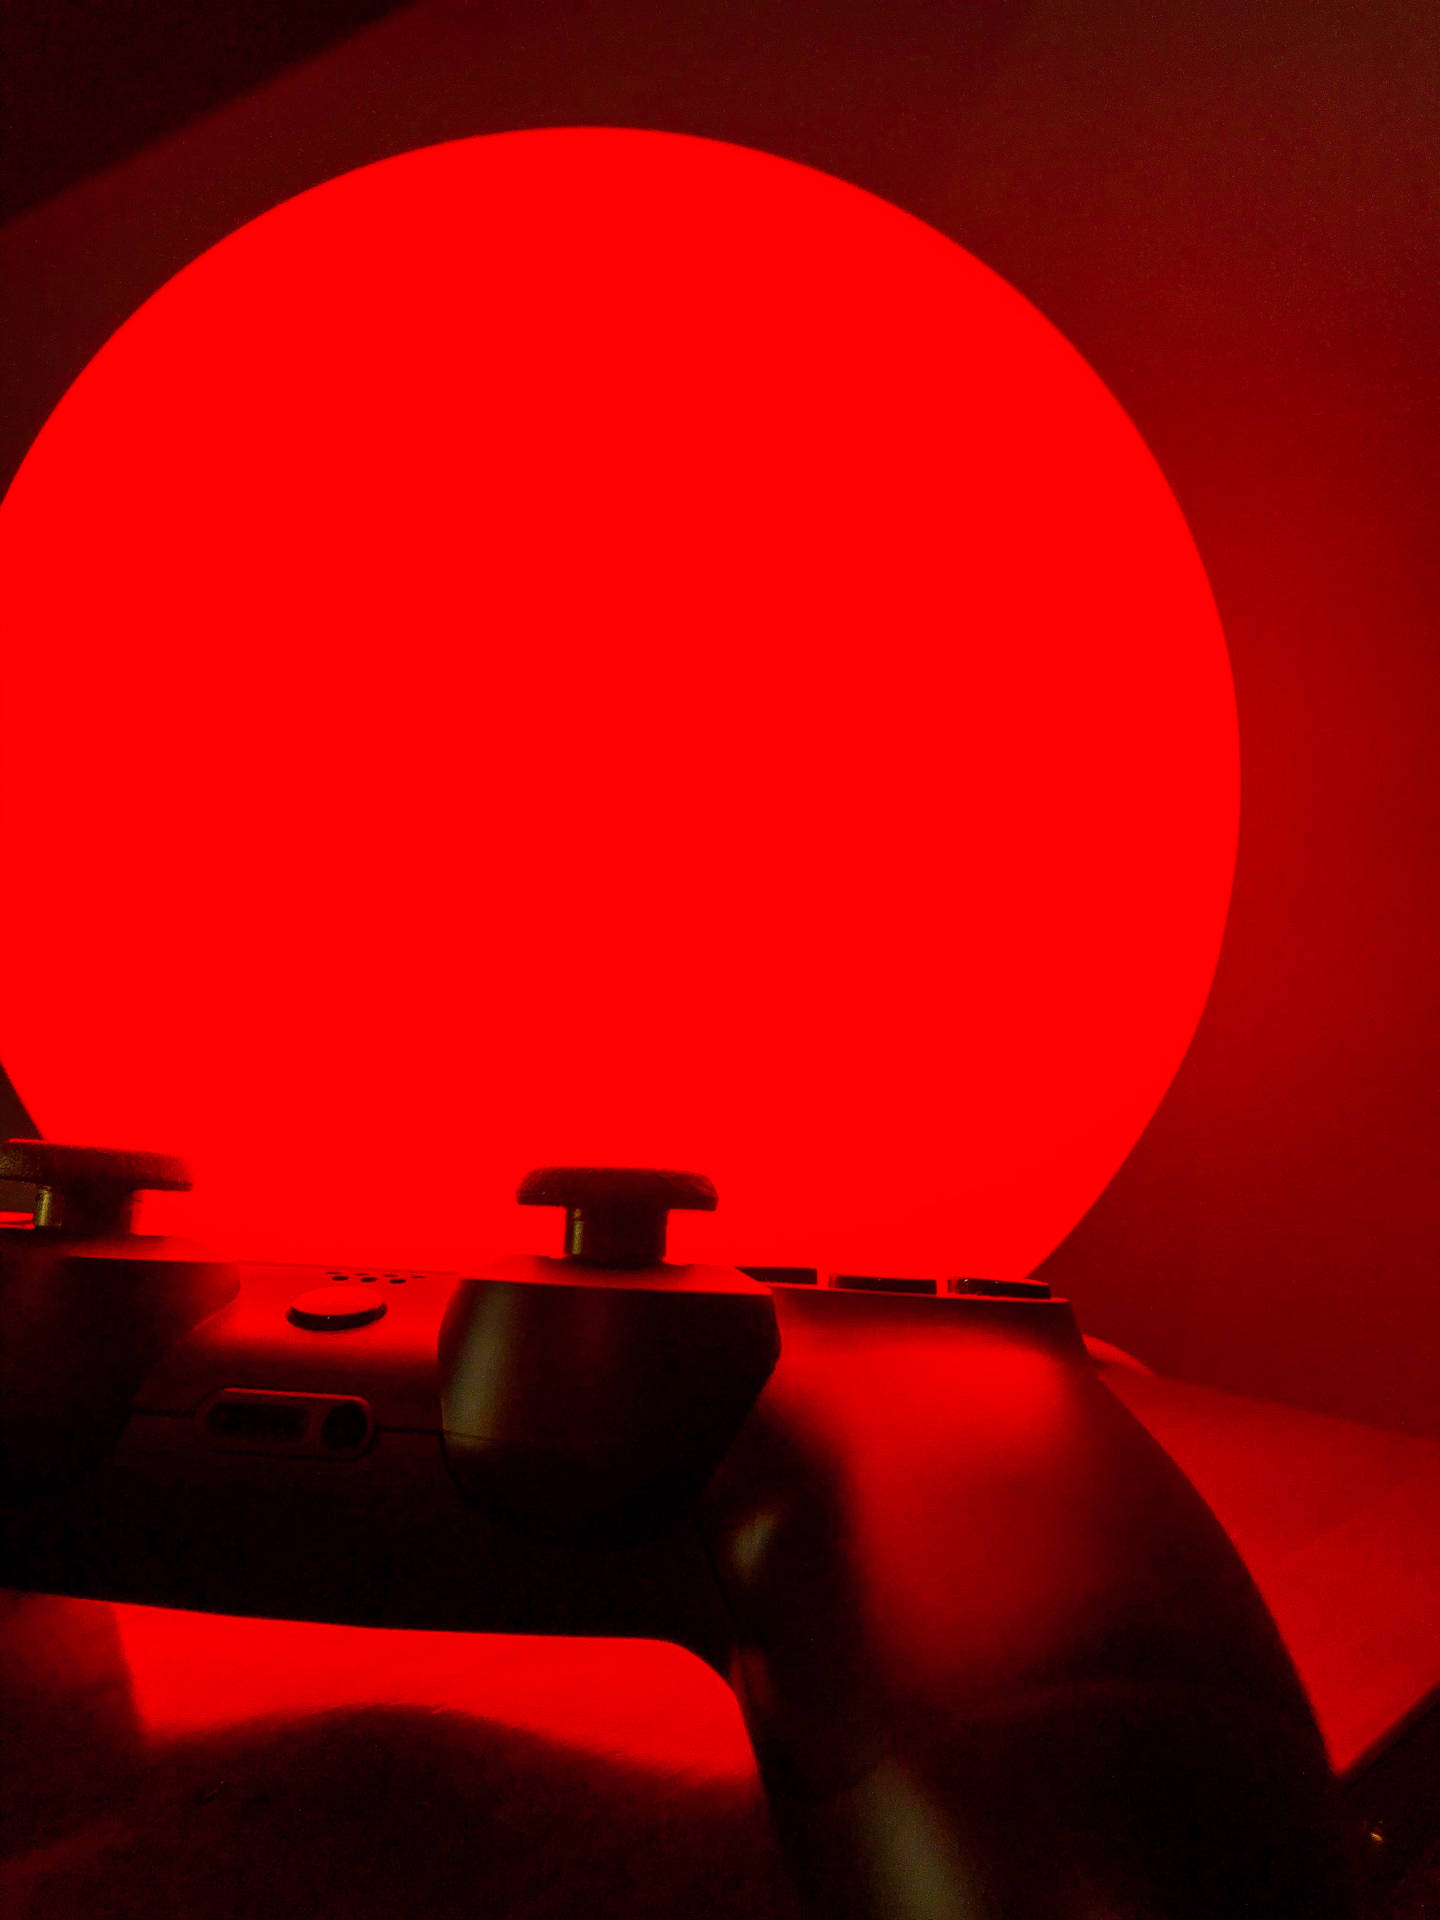 Game on with this vivid red wireless controller Wallpaper